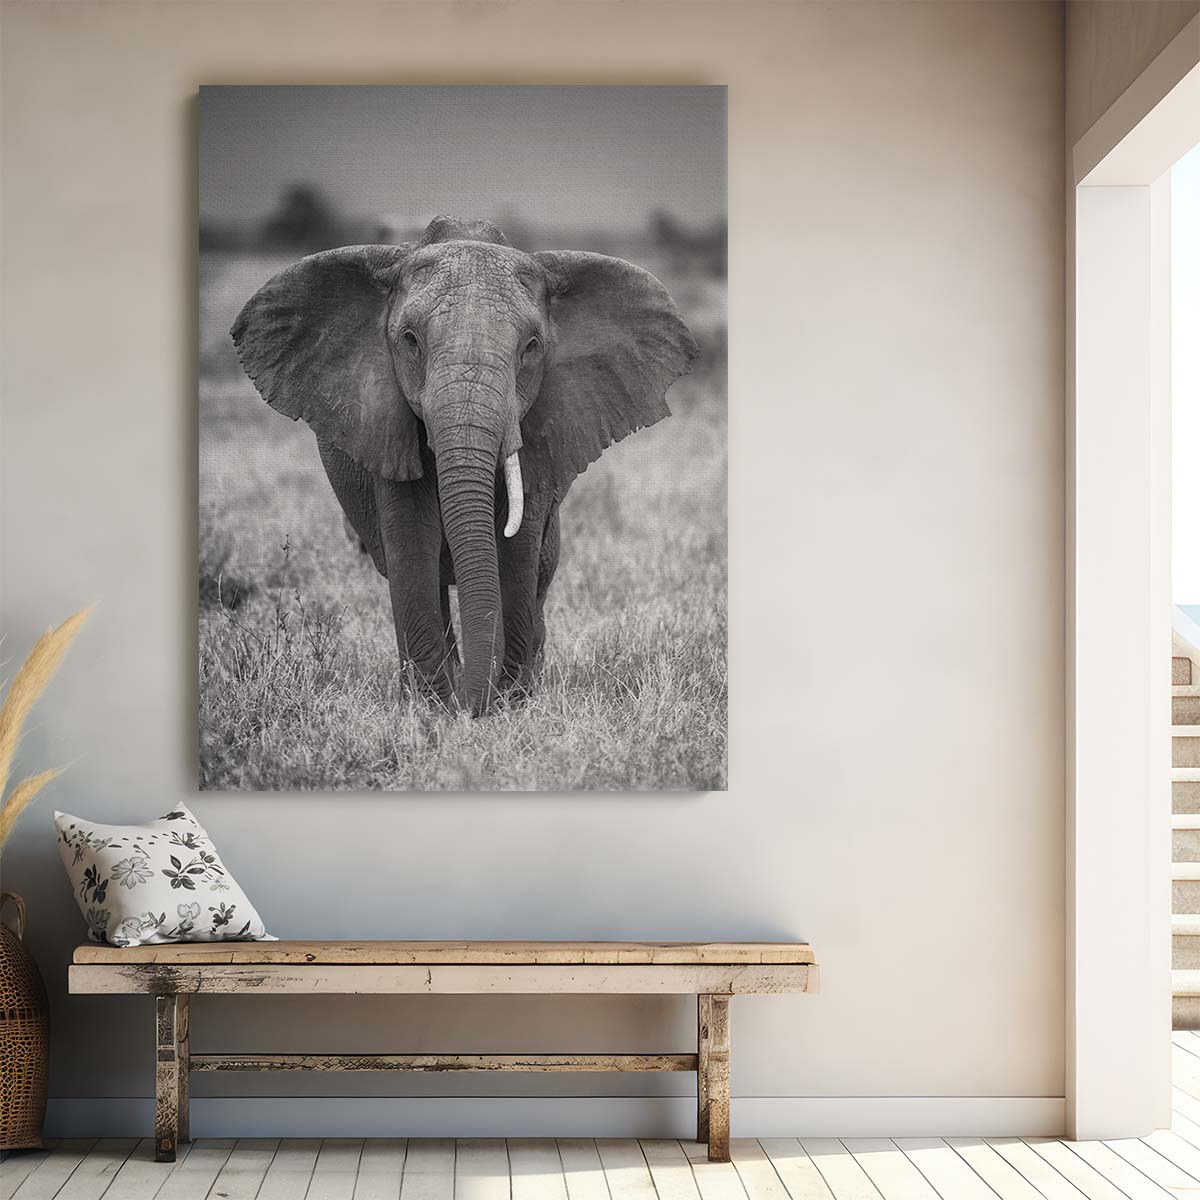 Majestic African Elephant Portrait Monochrome Wildlife Photography by Luxuriance Designs, made in USA